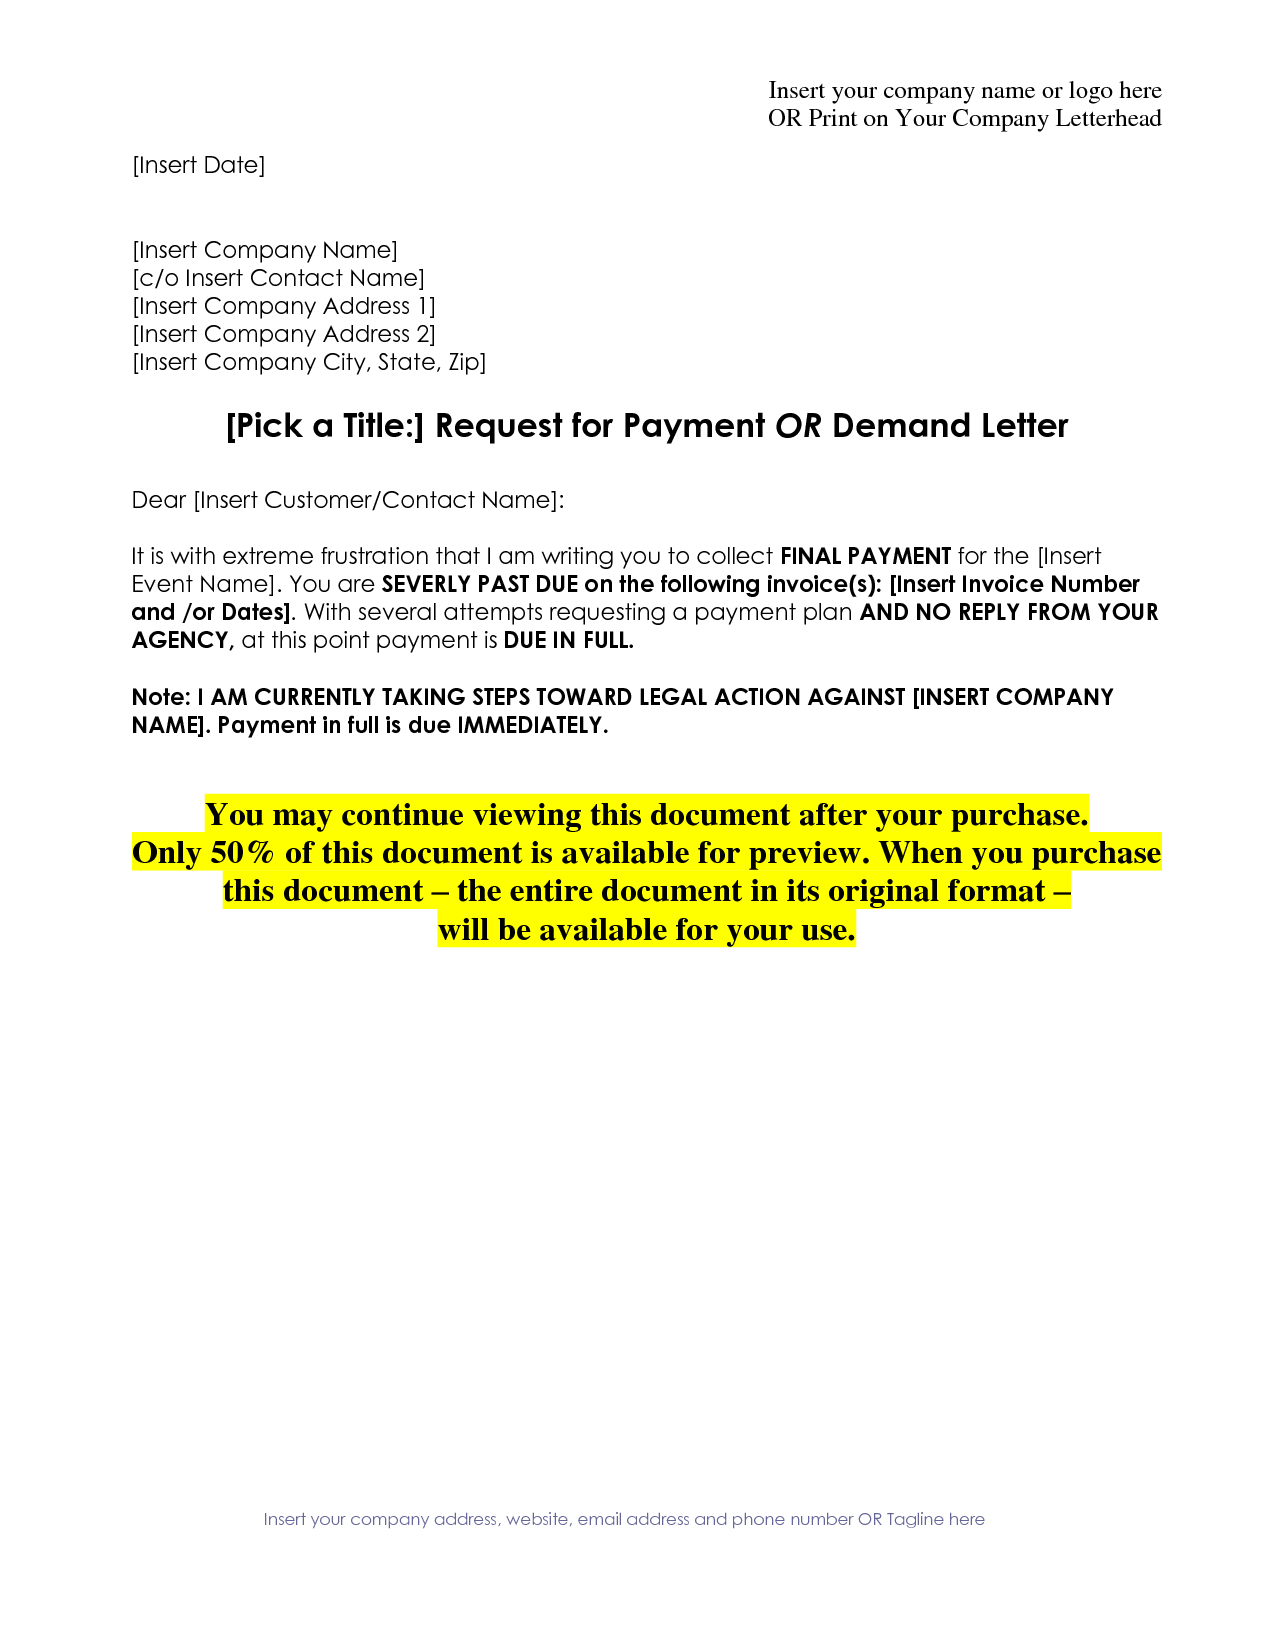 Demand Letter For Payment. Sample Demand Letter For Payment Of 